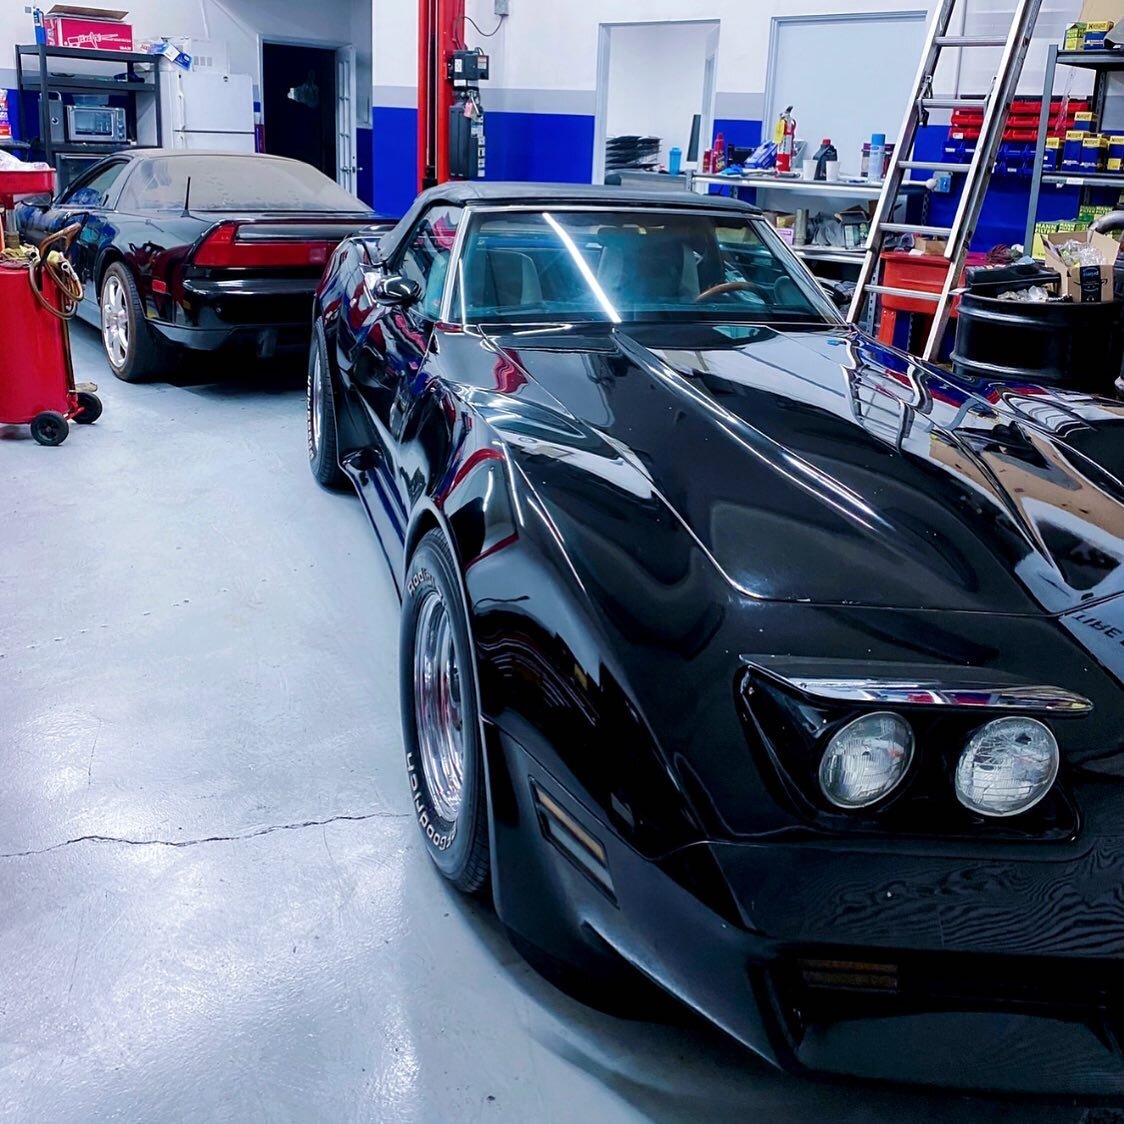 Flash Back Friday with some classic beauties in the shop. We really appreciate how well thought out the designs were for car back in the days. The fine details really makes them even more beautiful today-decades later. 🤯🖤🏎
.
.
.
#honda #nsx #acura